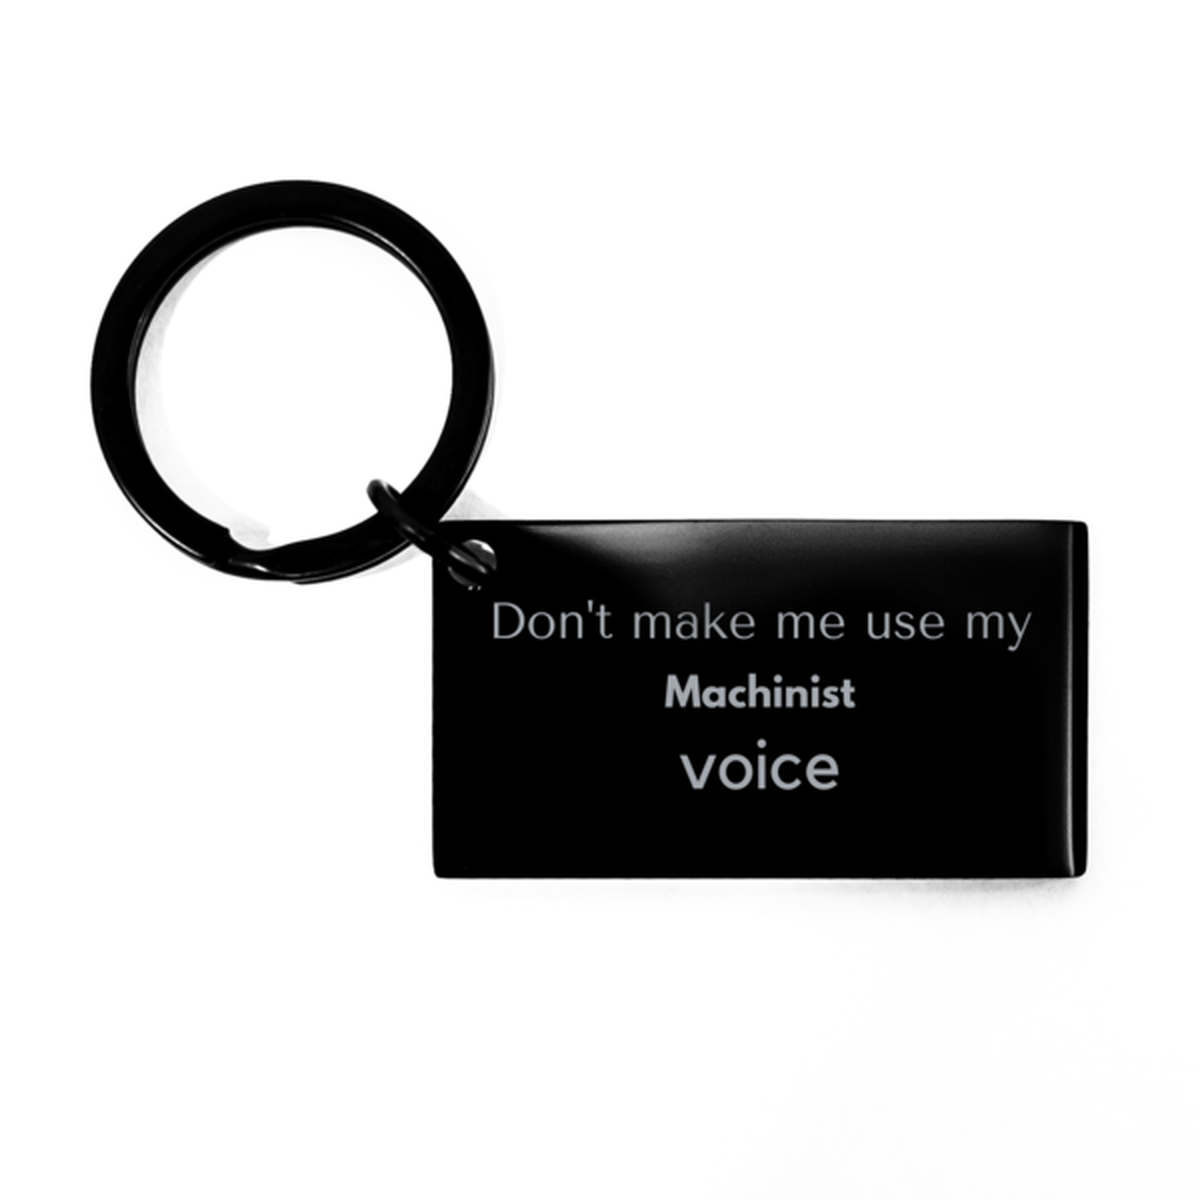 Don't make me use my Machinist voice, Sarcasm Machinist Gifts, Christmas Machinist Keychain Birthday Unique Gifts For Machinist Coworkers, Men, Women, Colleague, Friends